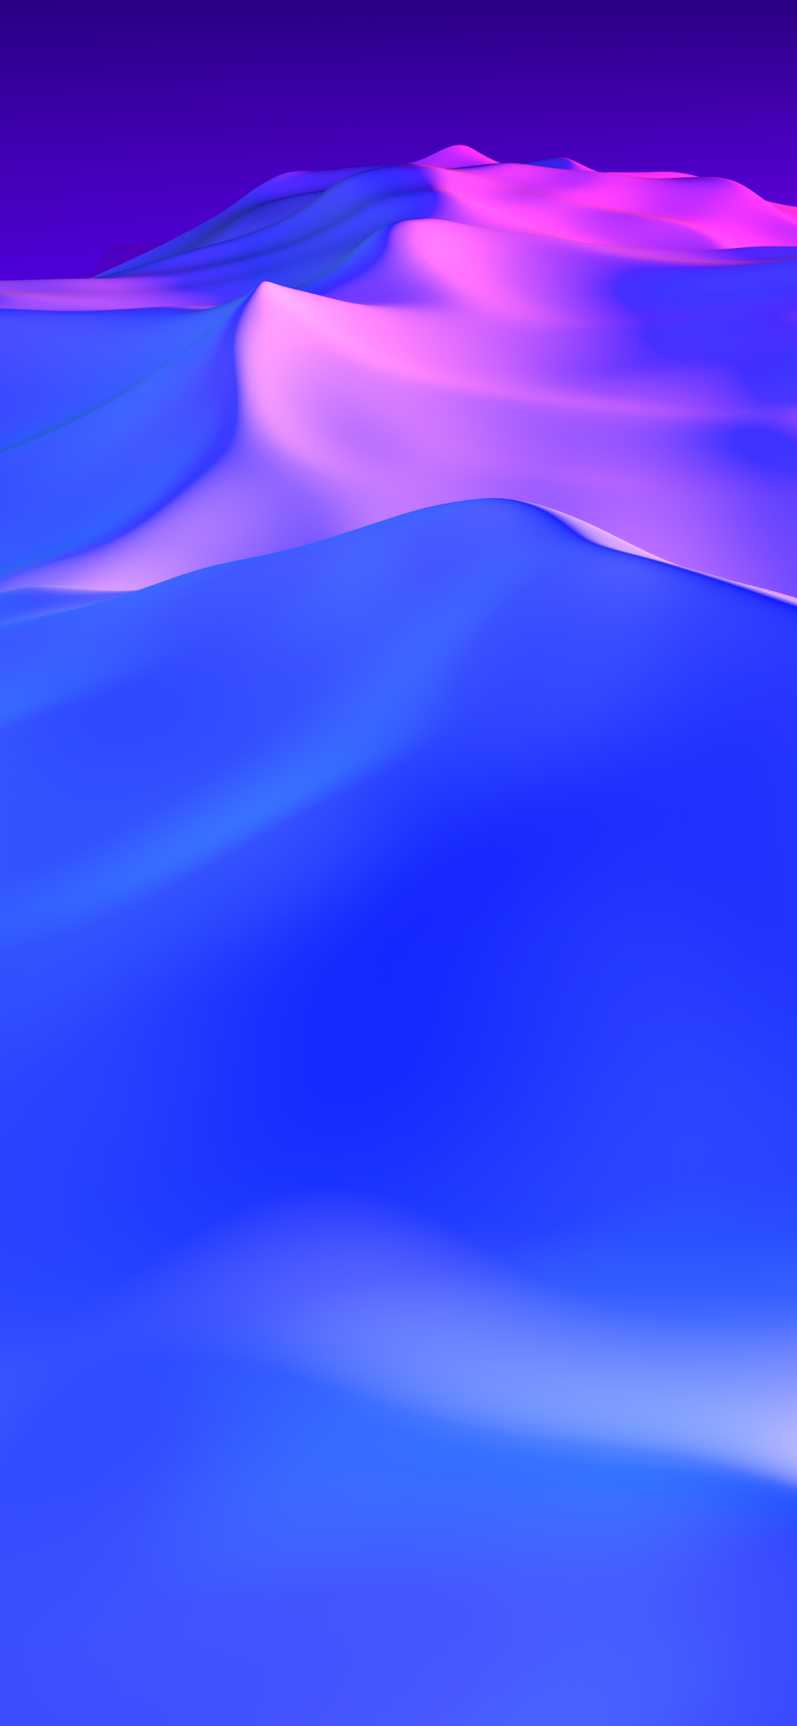 Iphone X Wallpapers In Hd